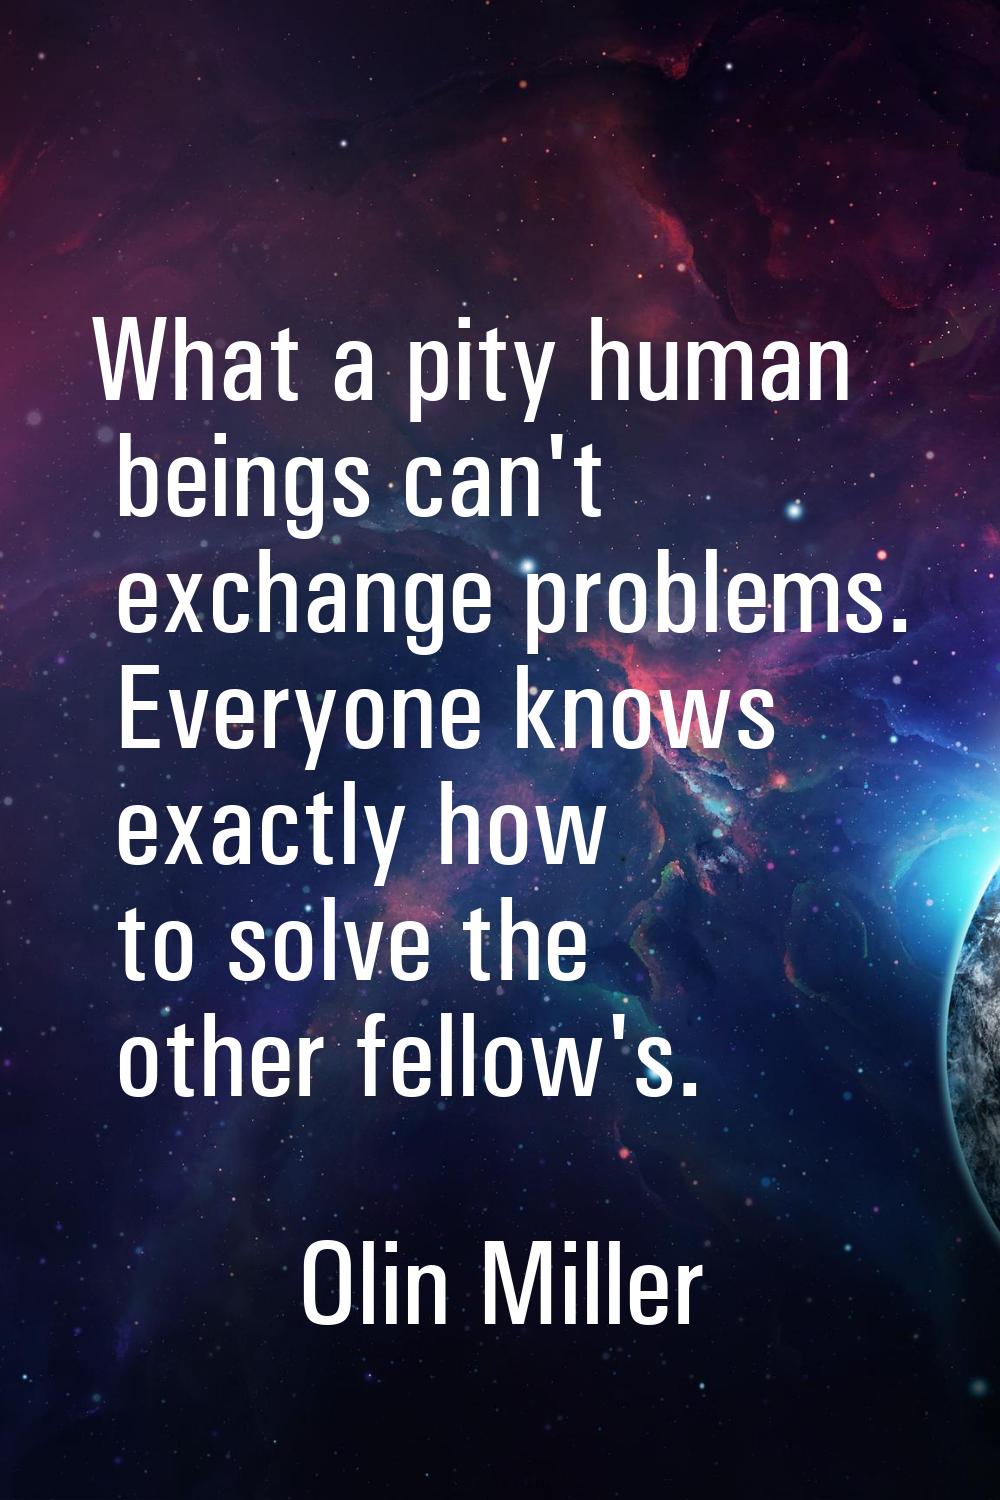 What a pity human beings can't exchange problems. Everyone knows exactly how to solve the other fel